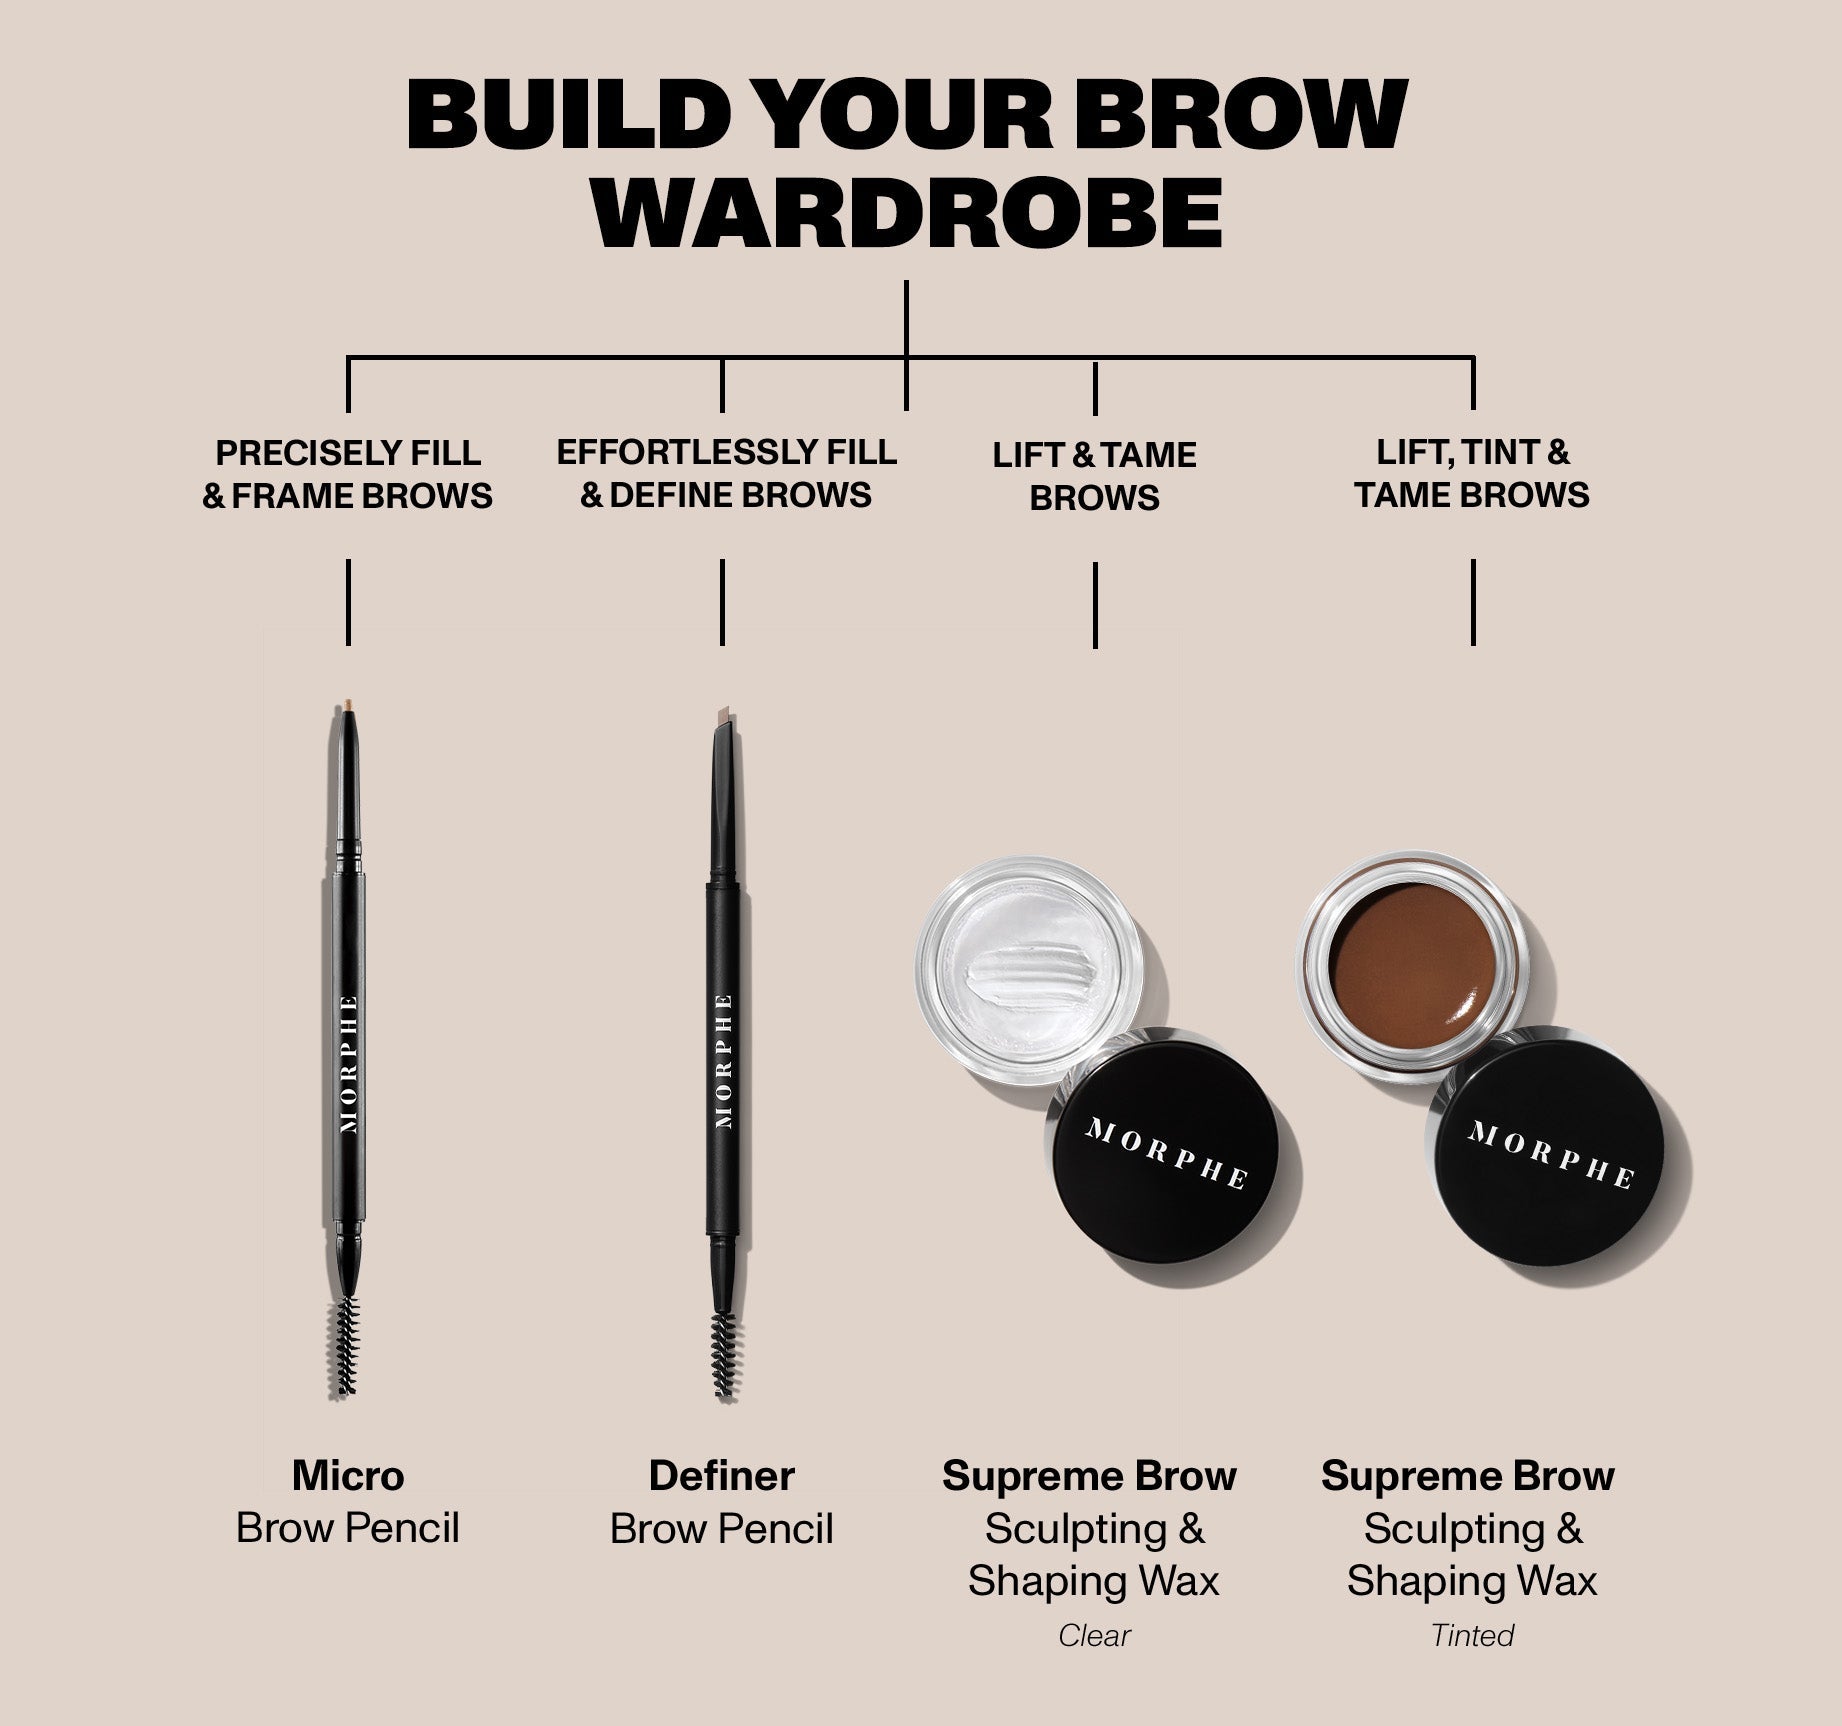 Supreme Brow Sculpting And Shaping Wax - Almond - Image 10